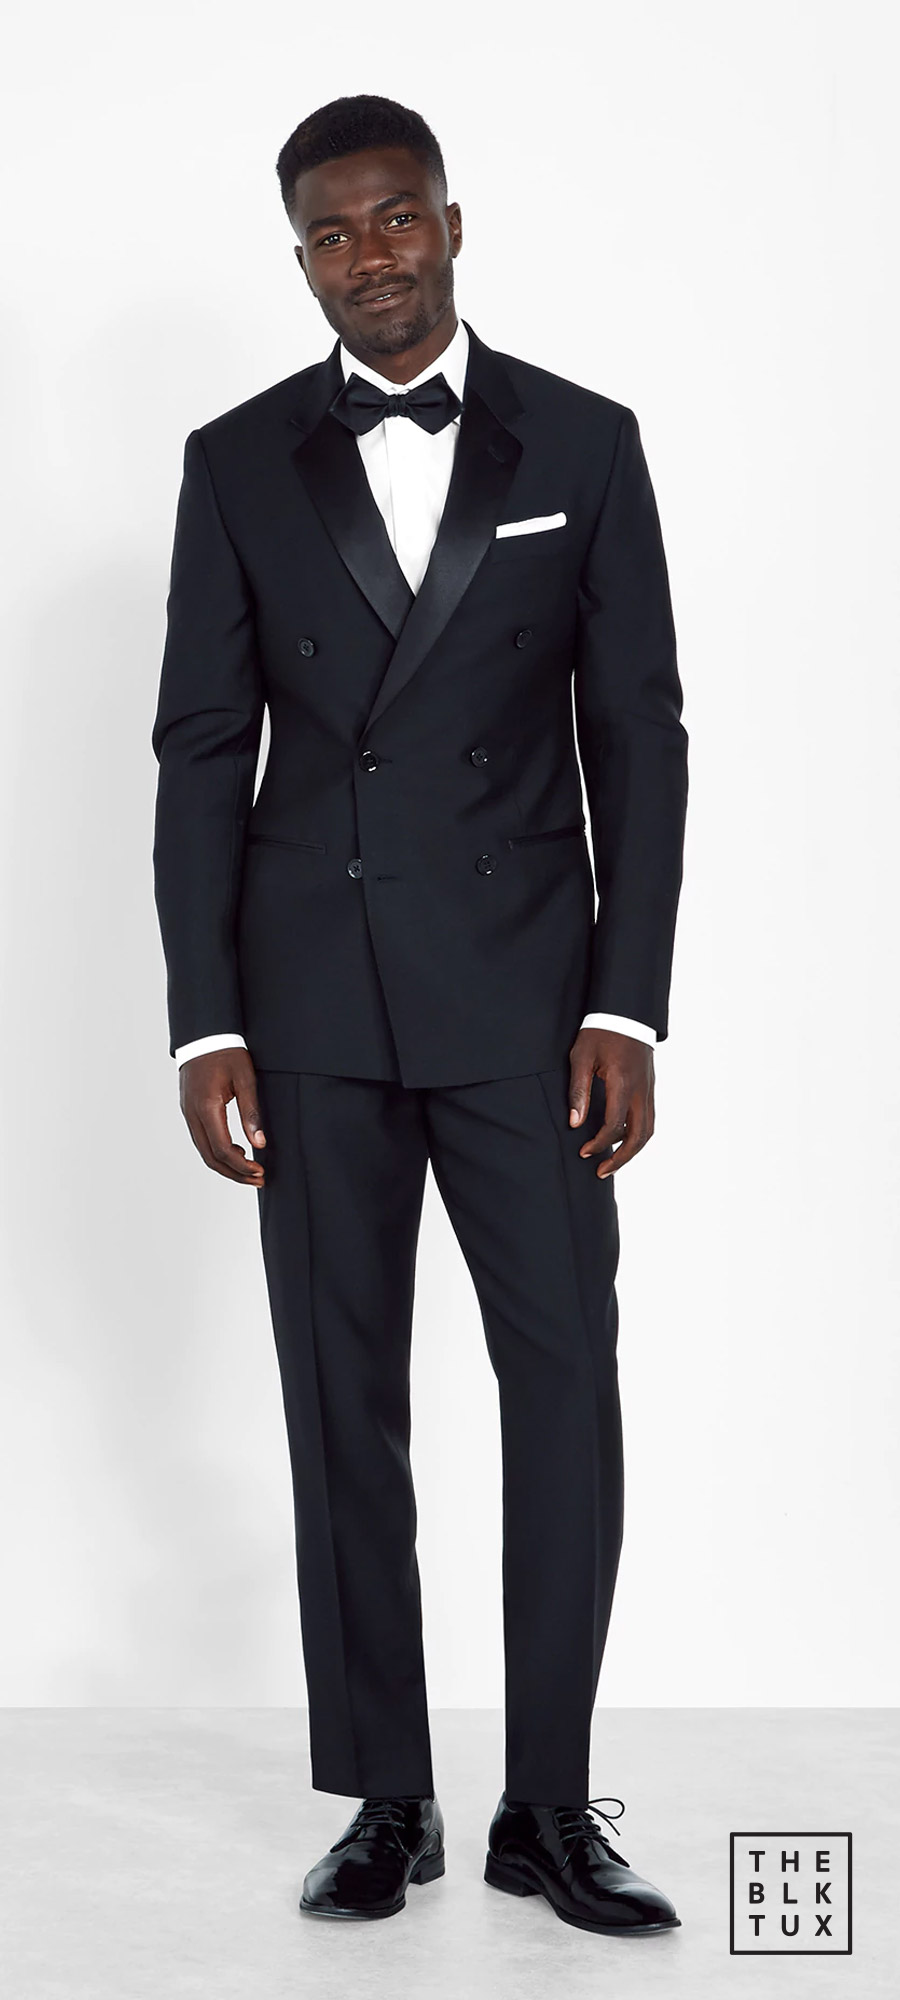 the black tux 2017 online tuxedos rental service double breasted tuxedo groommen best man style